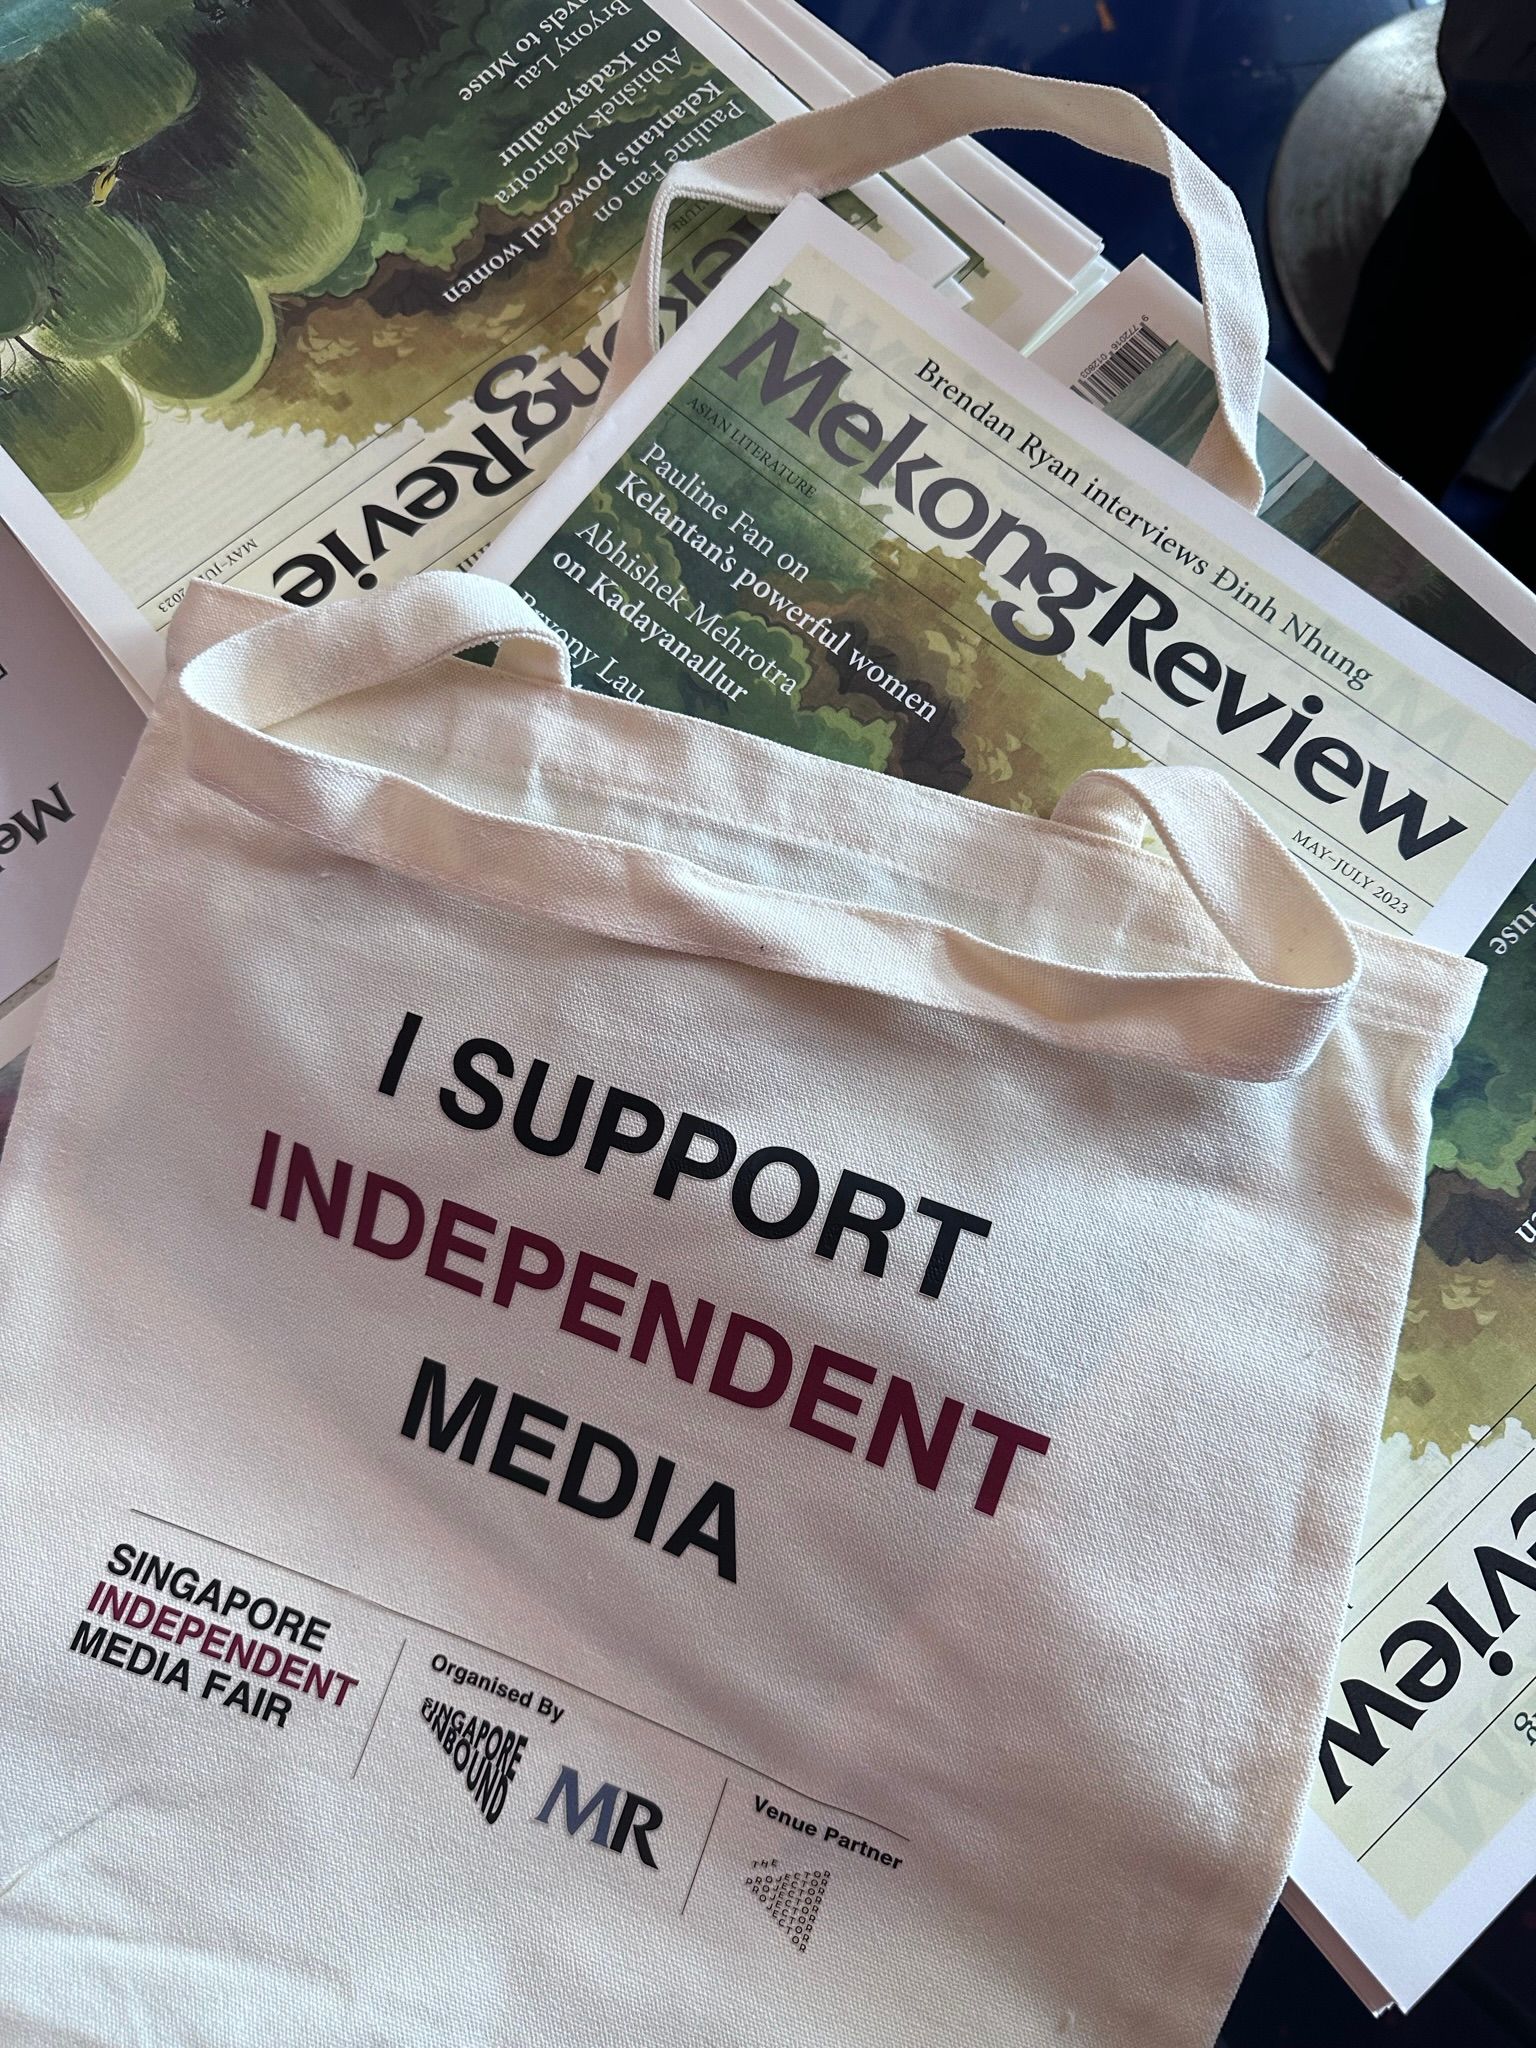 A photo of a canvas tote bag that says "I support independent media", with the Singapore Independent Media Fair branding at the bottom. There is a copy of the Mekong Review magazine half-inserted into it.